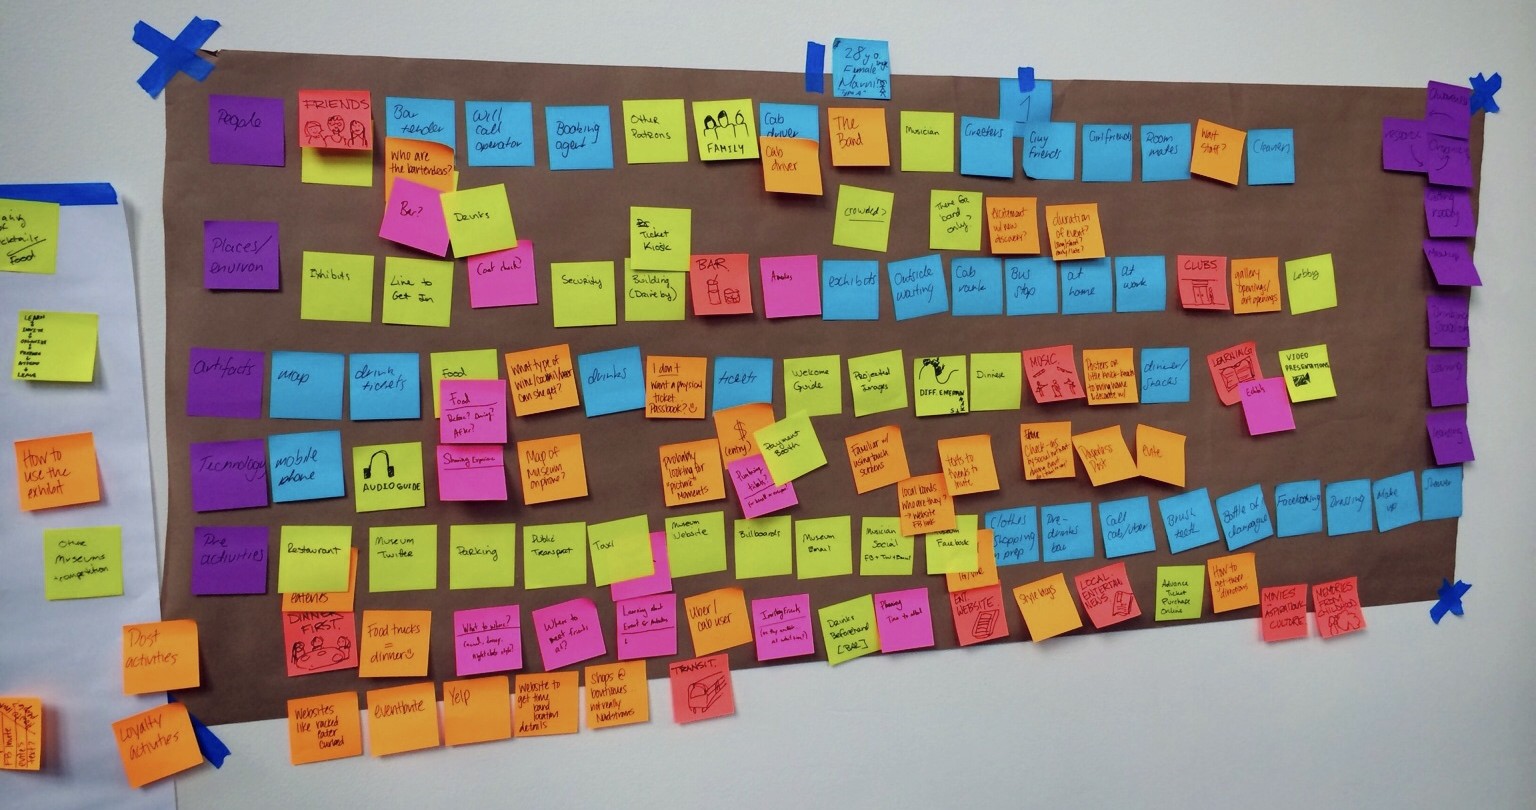 Colorful post-its covering a board